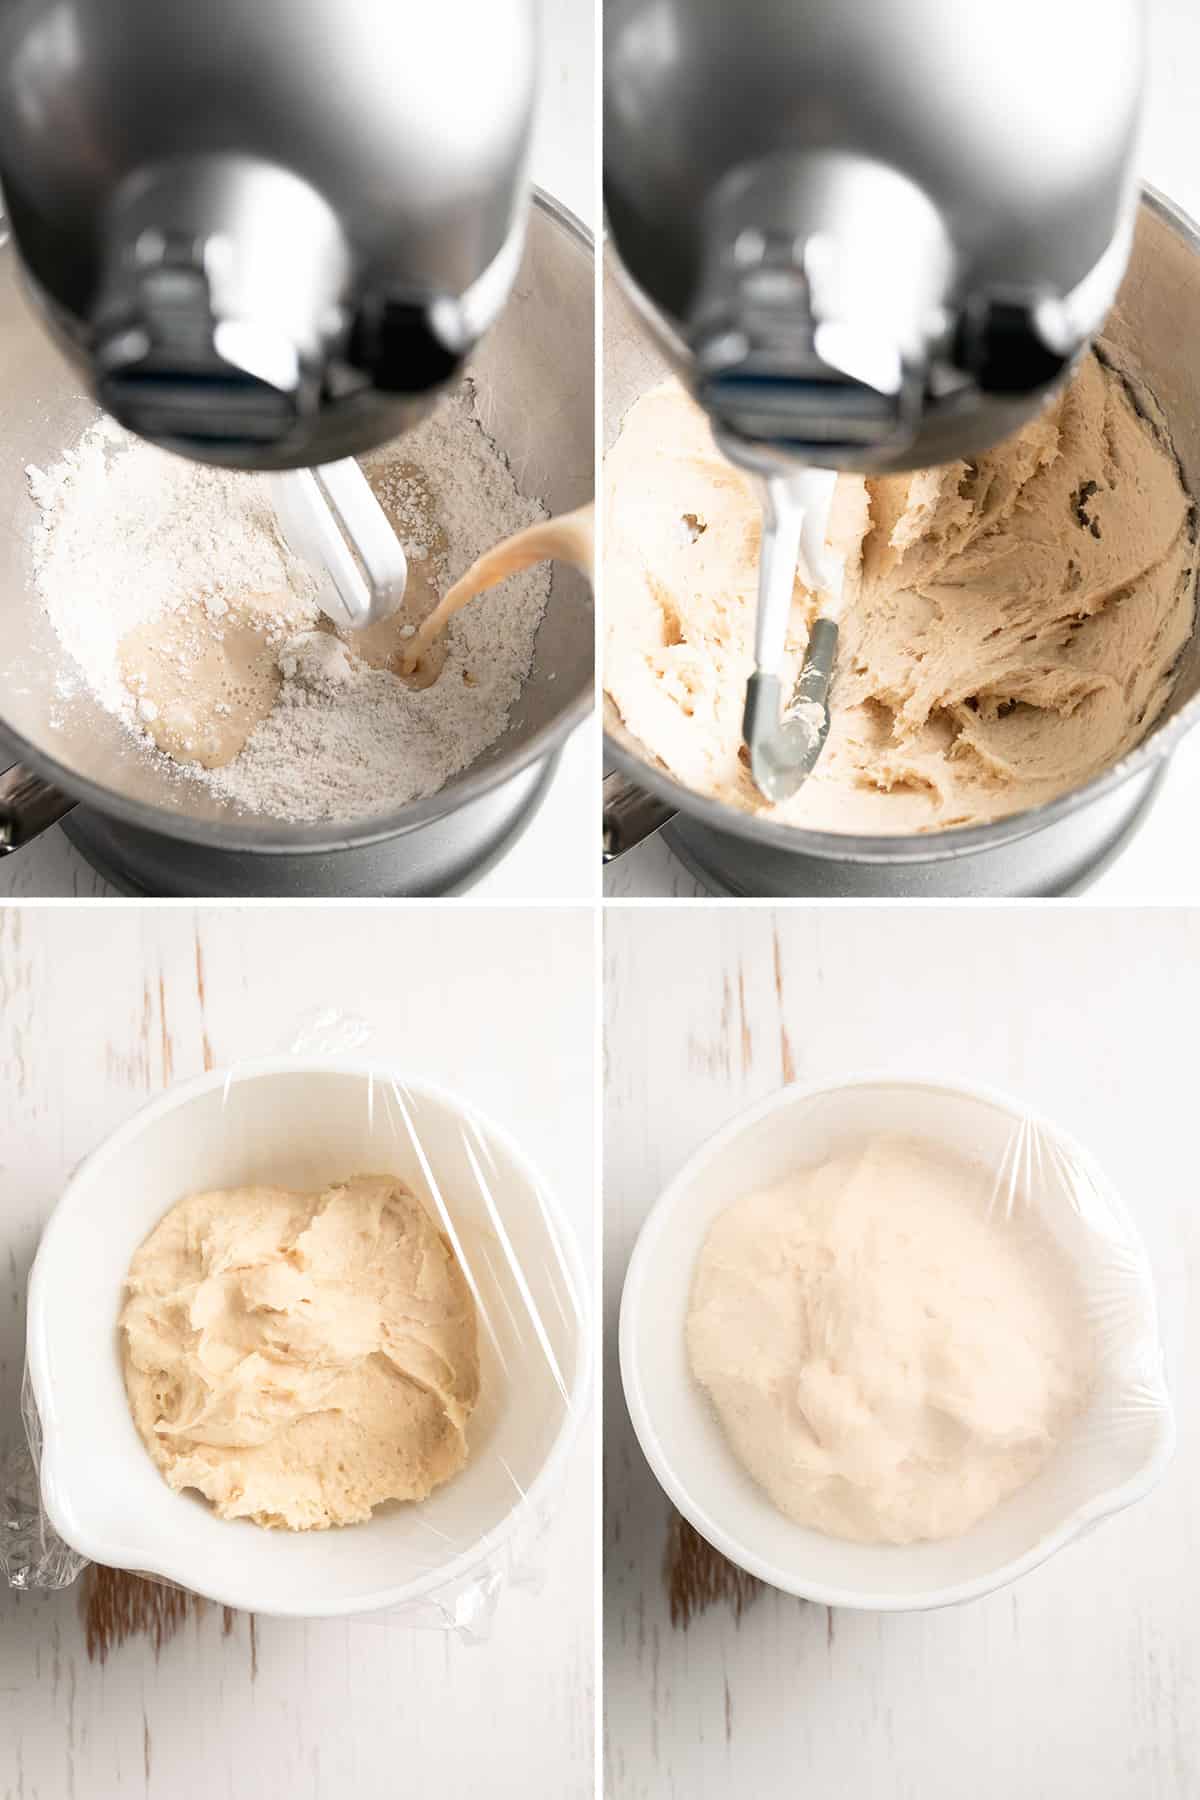 1. Pouring in warmed wet ingredients. 2. Mixing the dough in a stand mixer, 3. the dough in a plastic covered bowl, 4. The dough risen in the bowl.